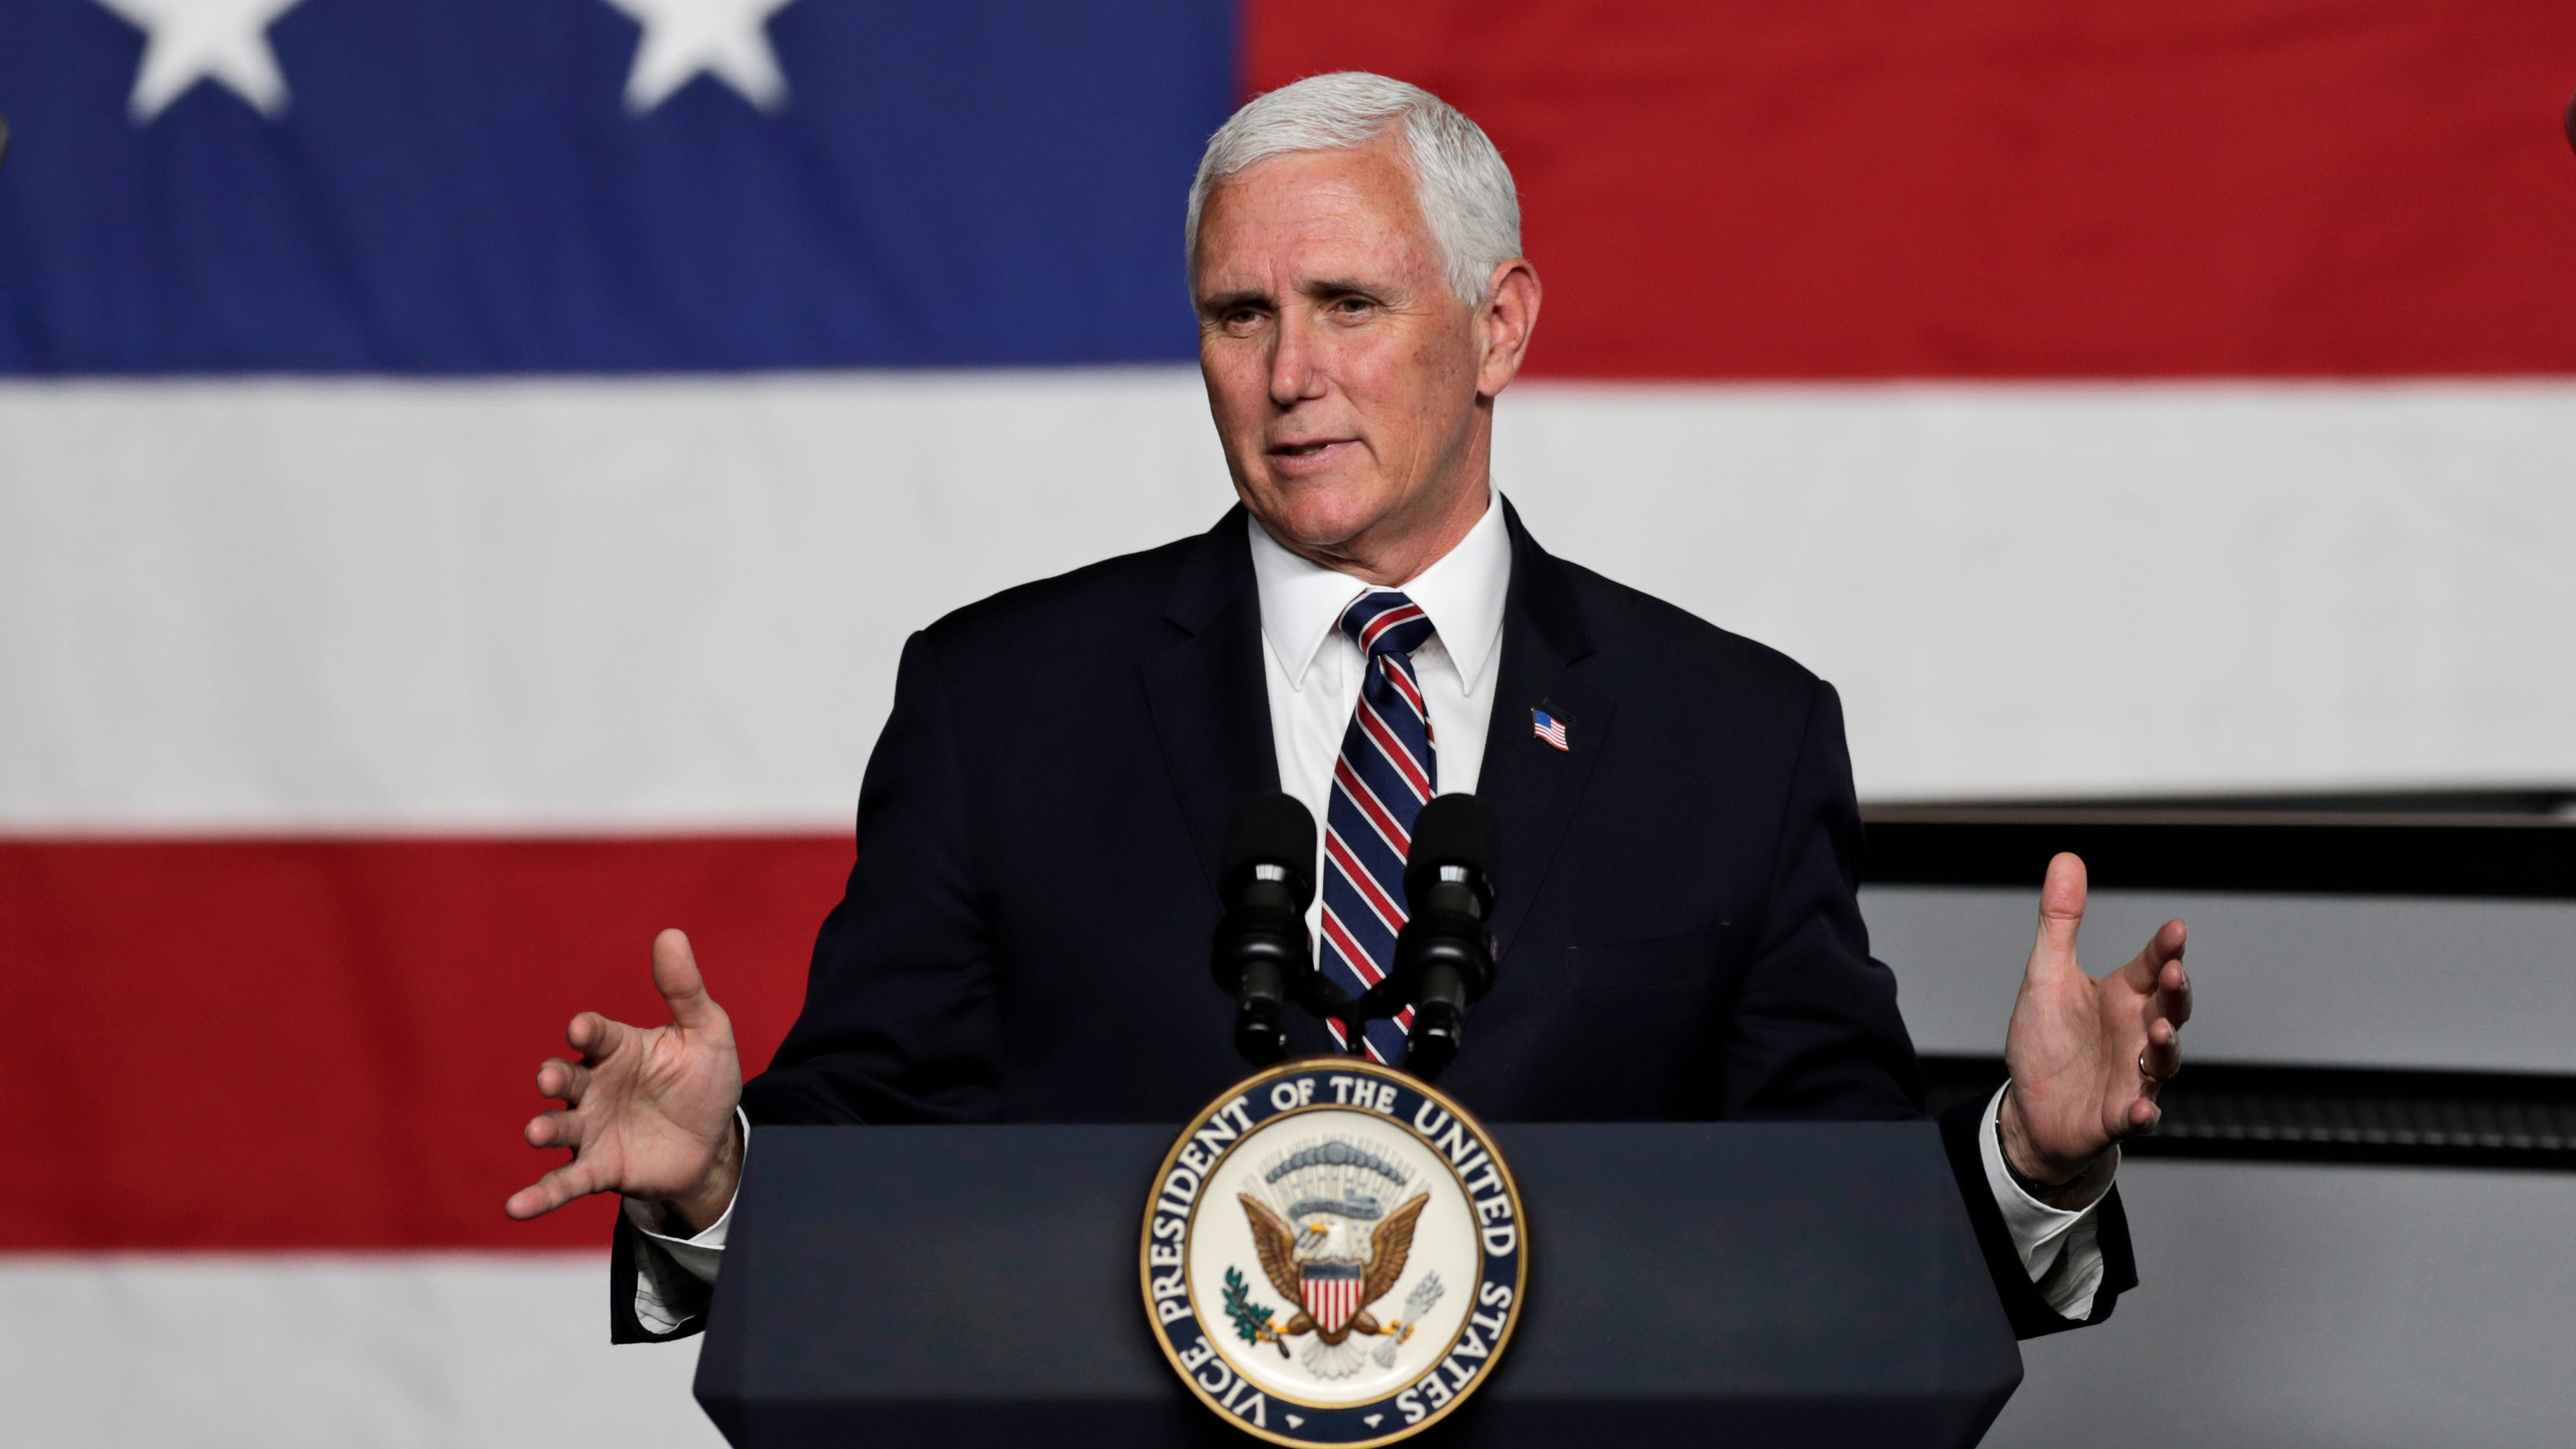 Vice President Mike Pence speaks at the launch of the electric Endurance pick-up truck at Lordstown Motors Corporation.